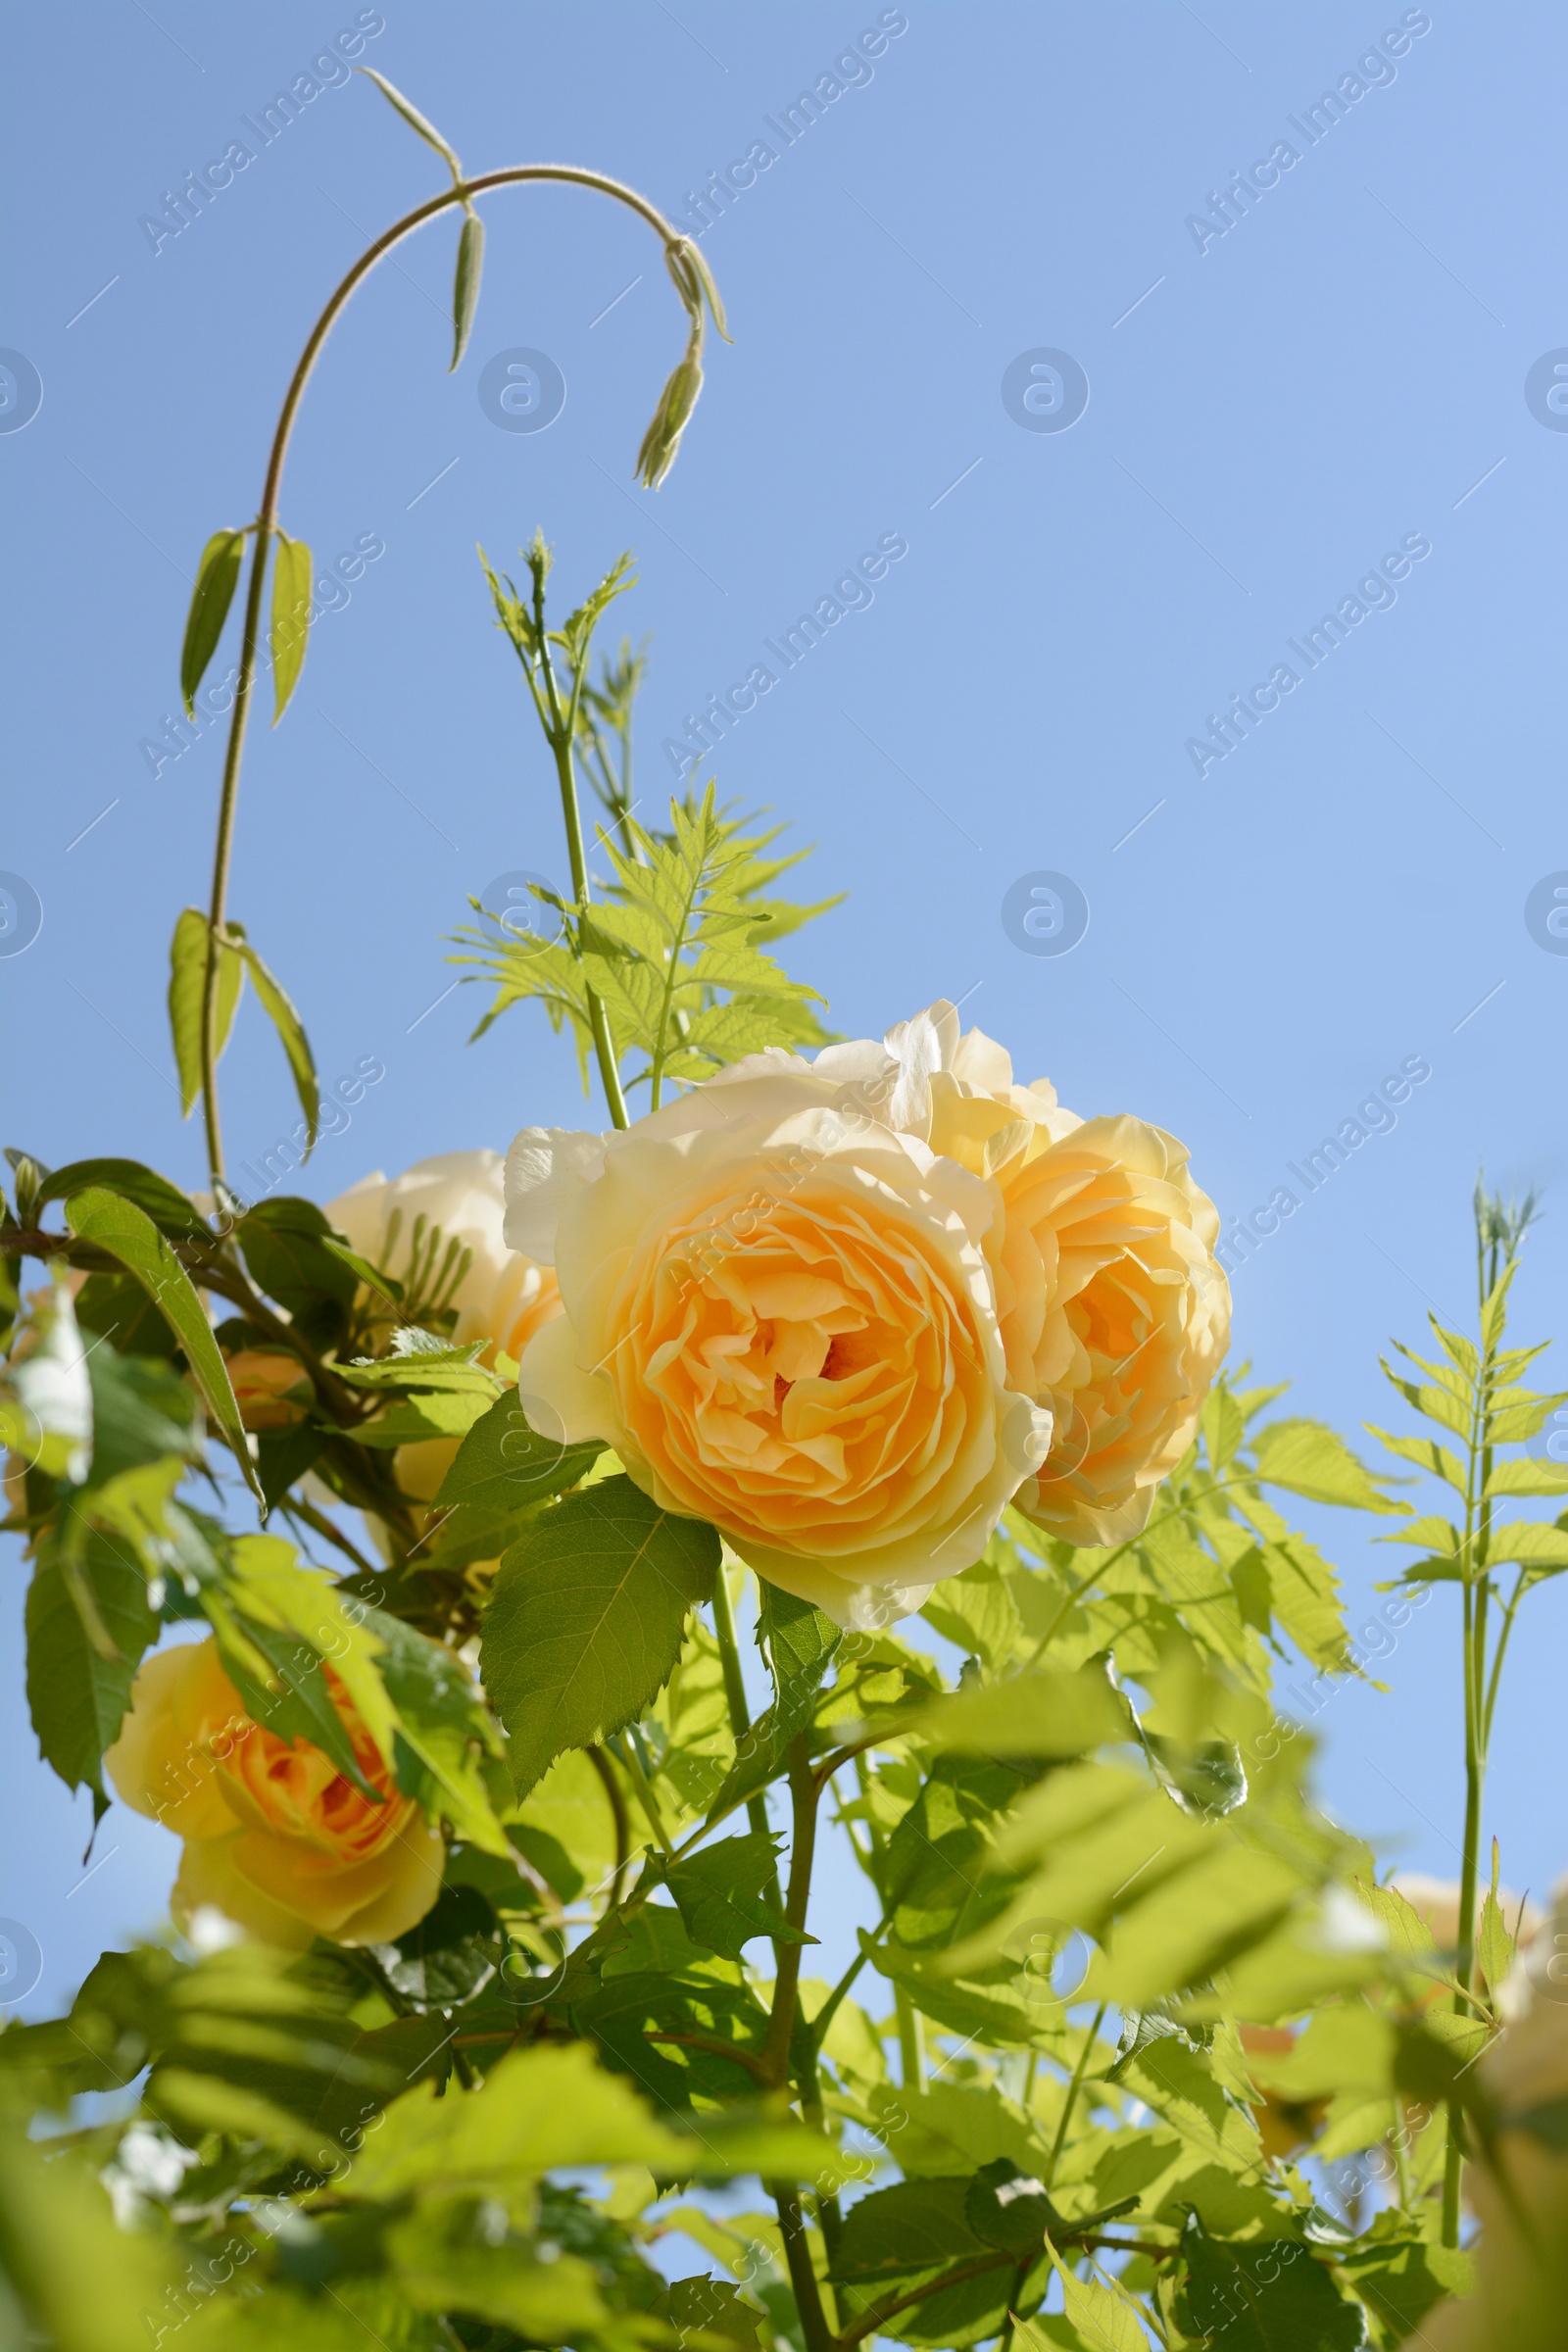 Photo of Beautiful yellow rose flowers blooming against blue sky